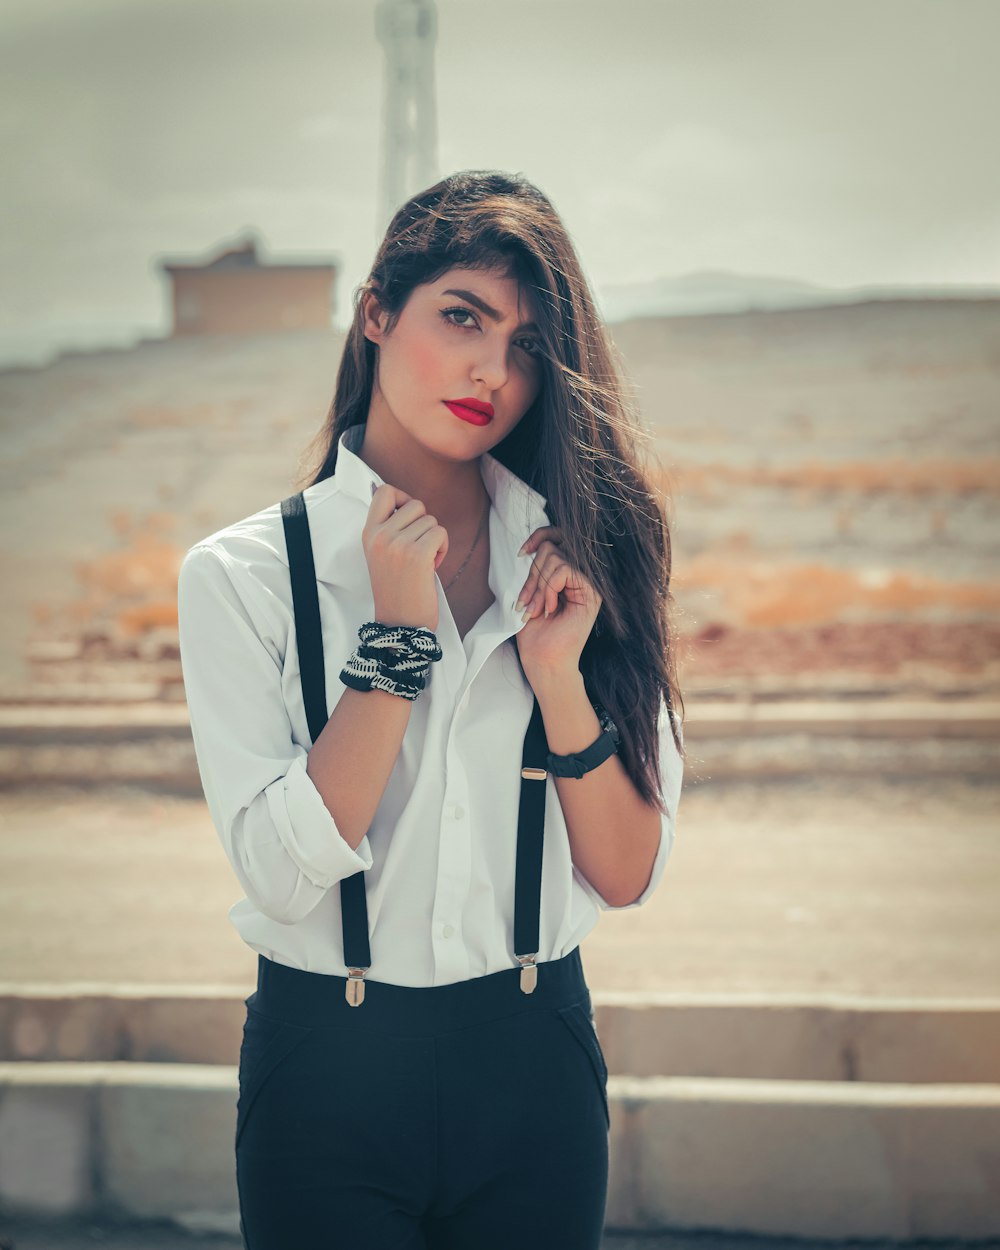 750+ Style Girl Pictures | Download Free Images on Unsplash